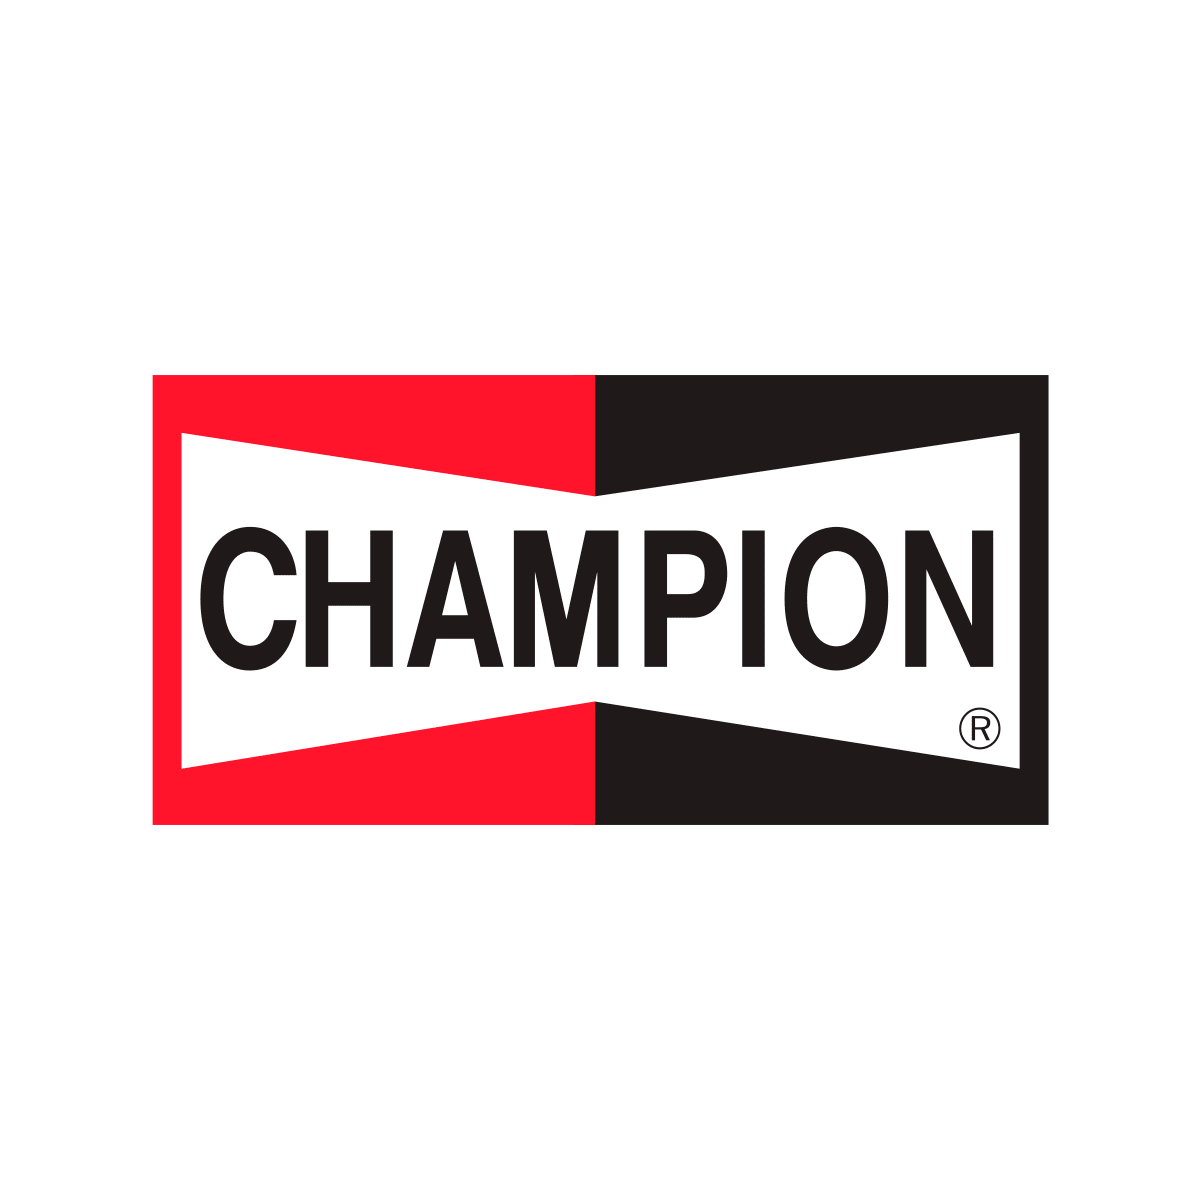 Champion N11YC SHOP PACK 24 PLUGS 302S Genuine Replacement Part Spark Plug